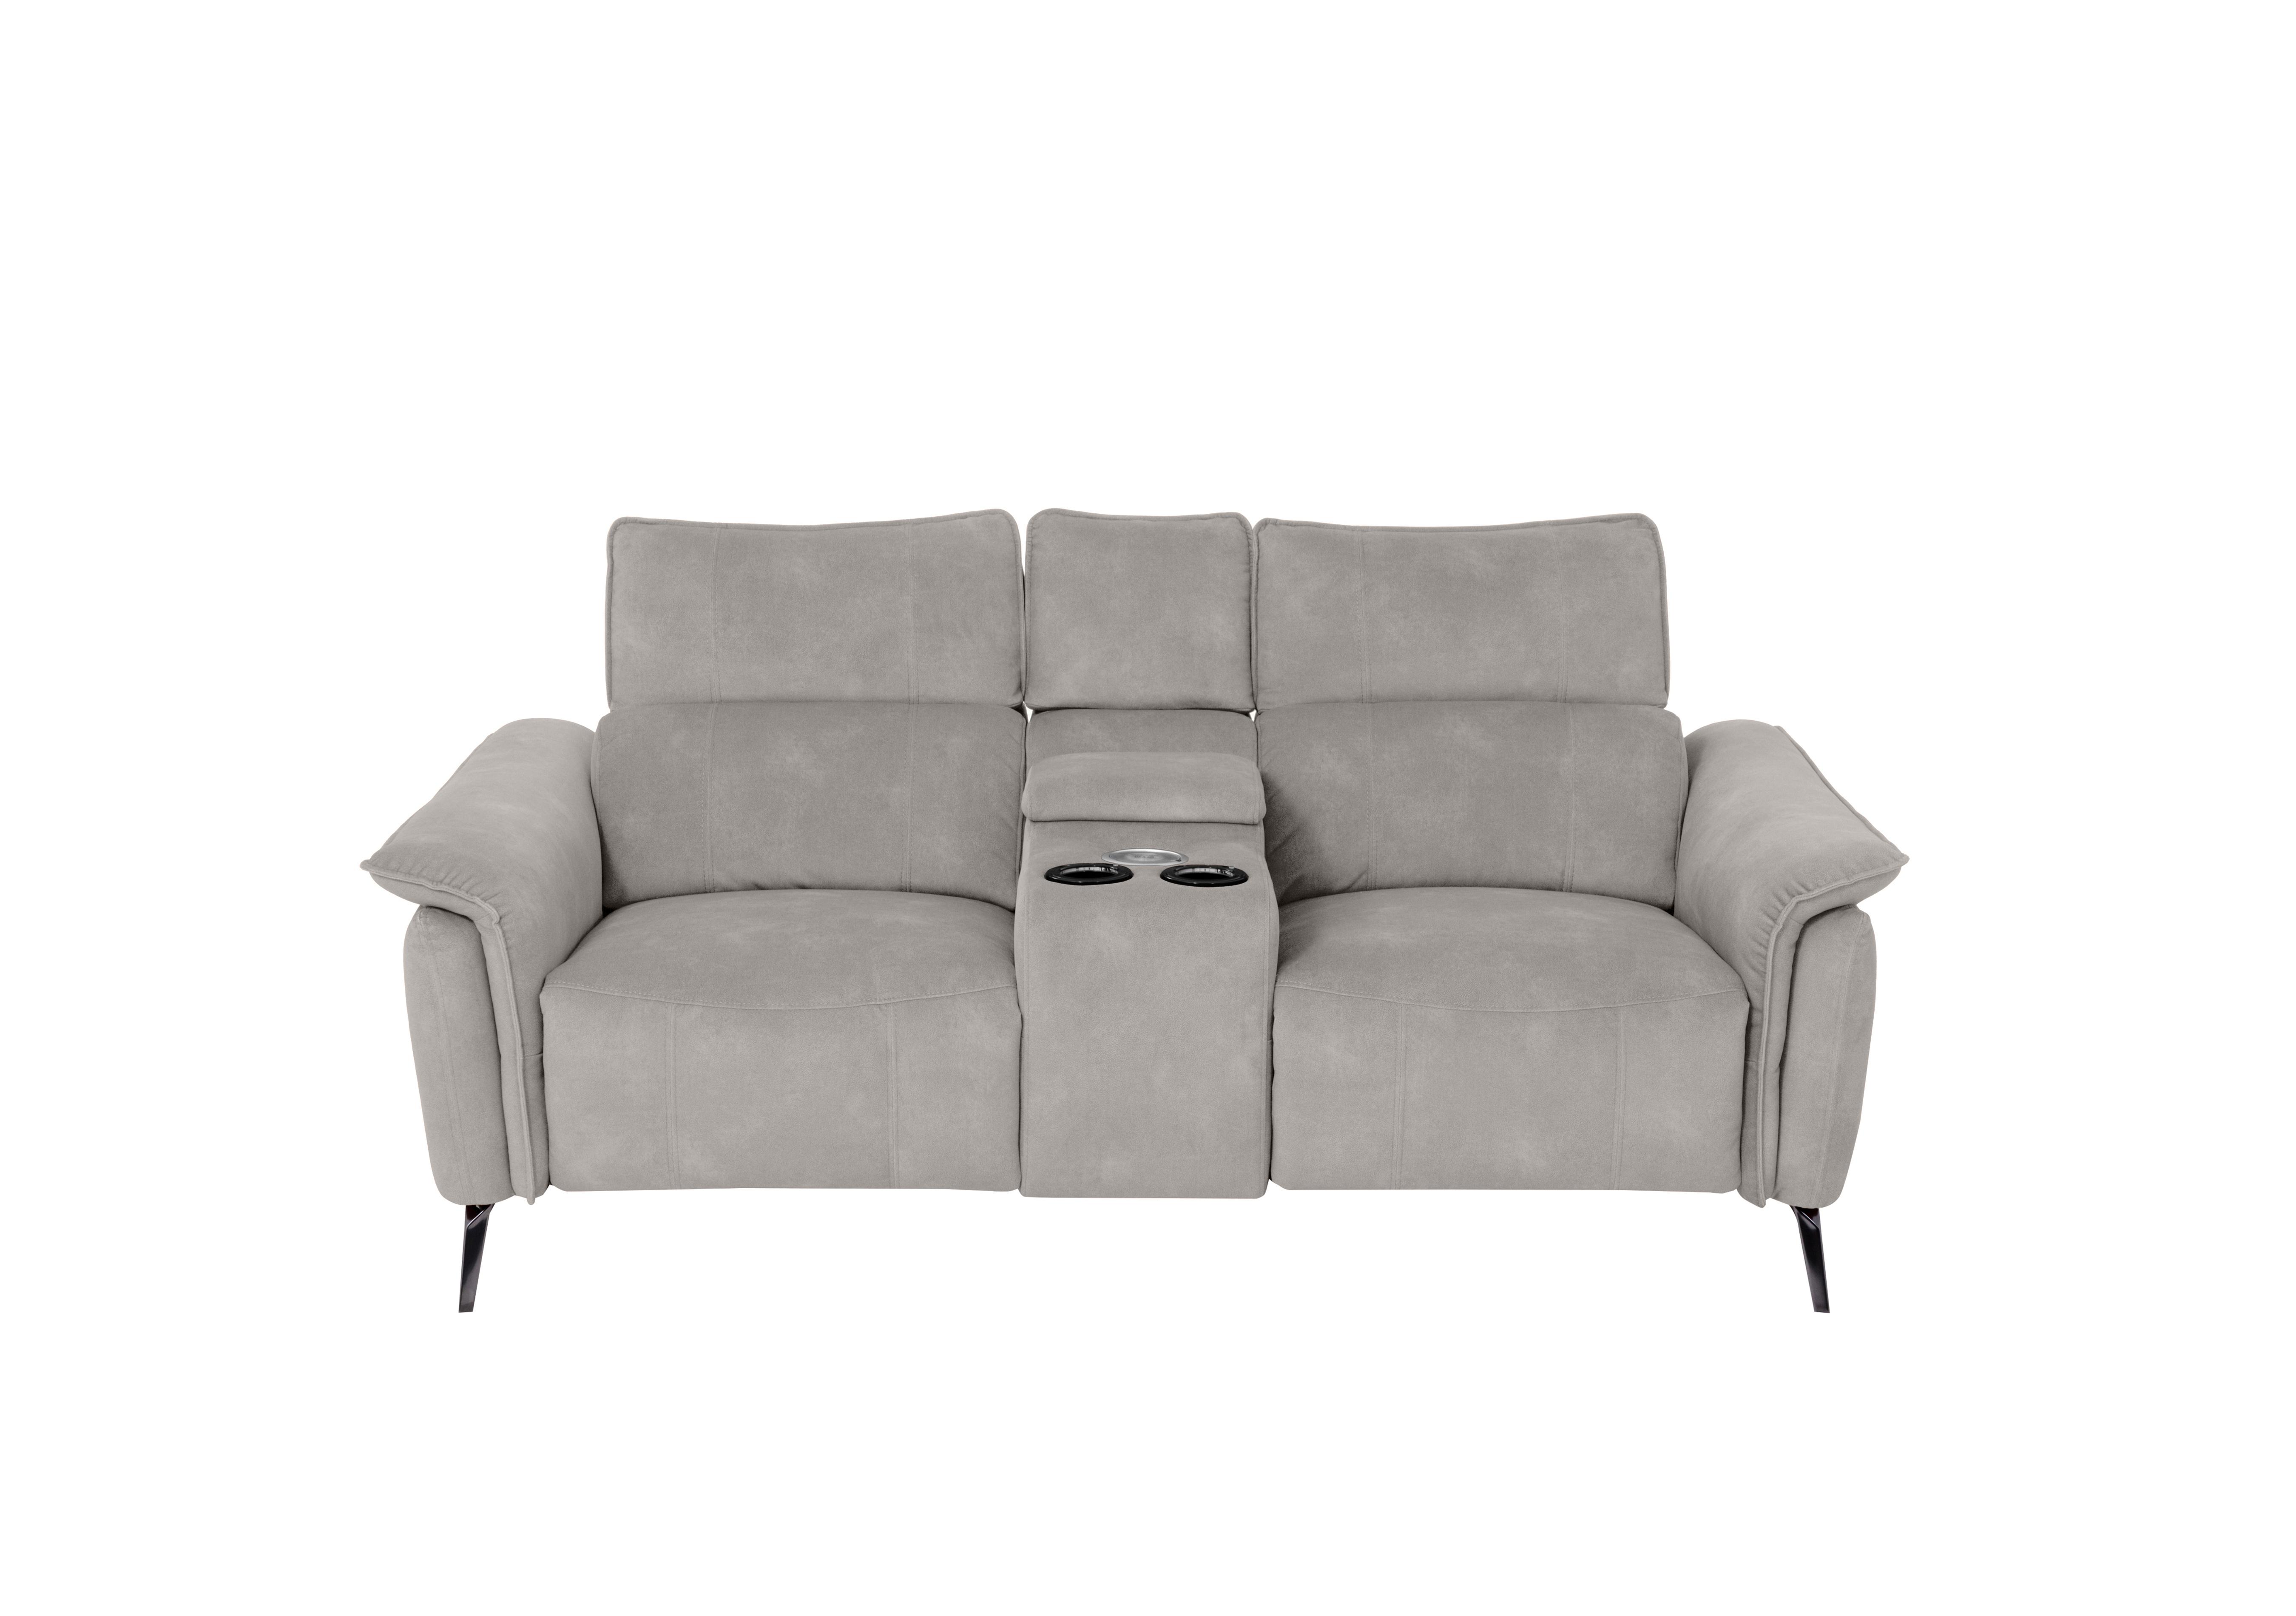 Jude 2 Seater Fabric Power Recliner Sofa with Smart Console Unit and Power Telescopic Headrests in Stone Dexter 02 43502 on Furniture Village